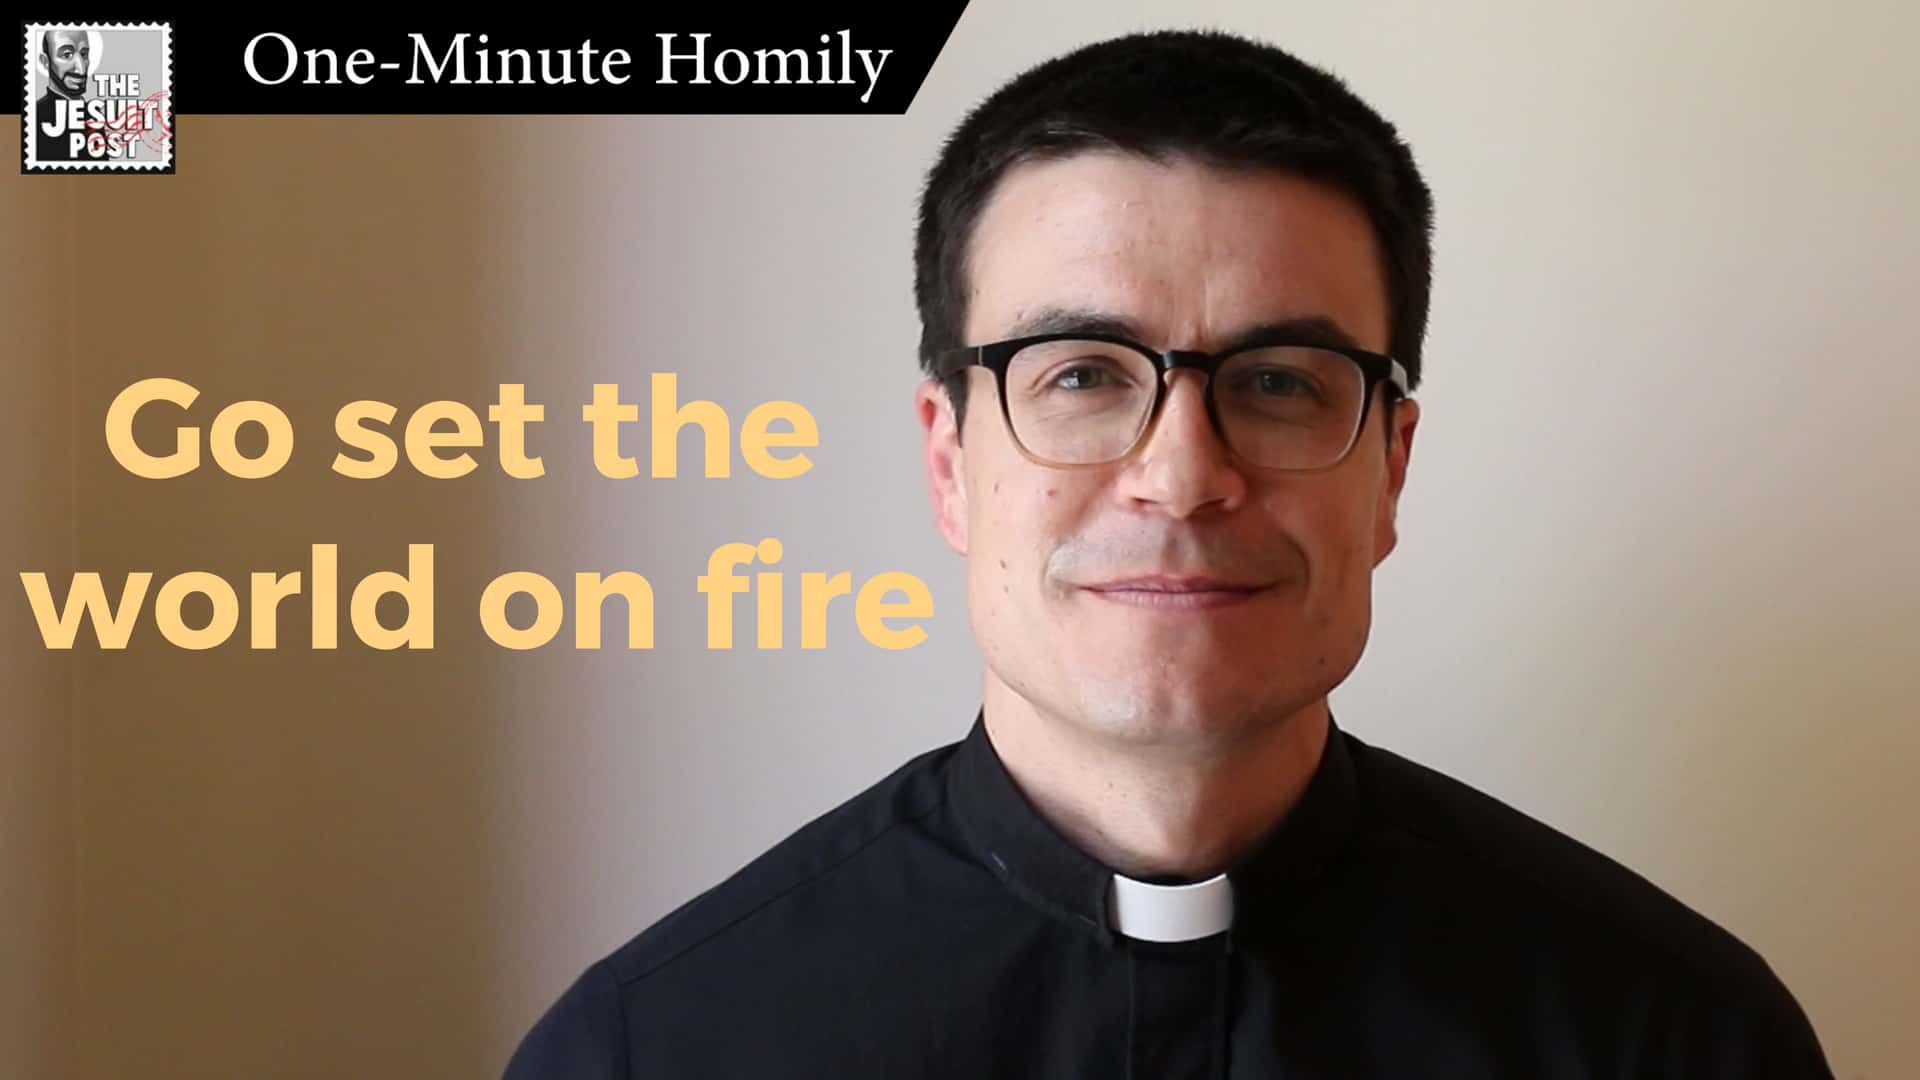 One-Minute Homily: “Go Set the World on Fire”